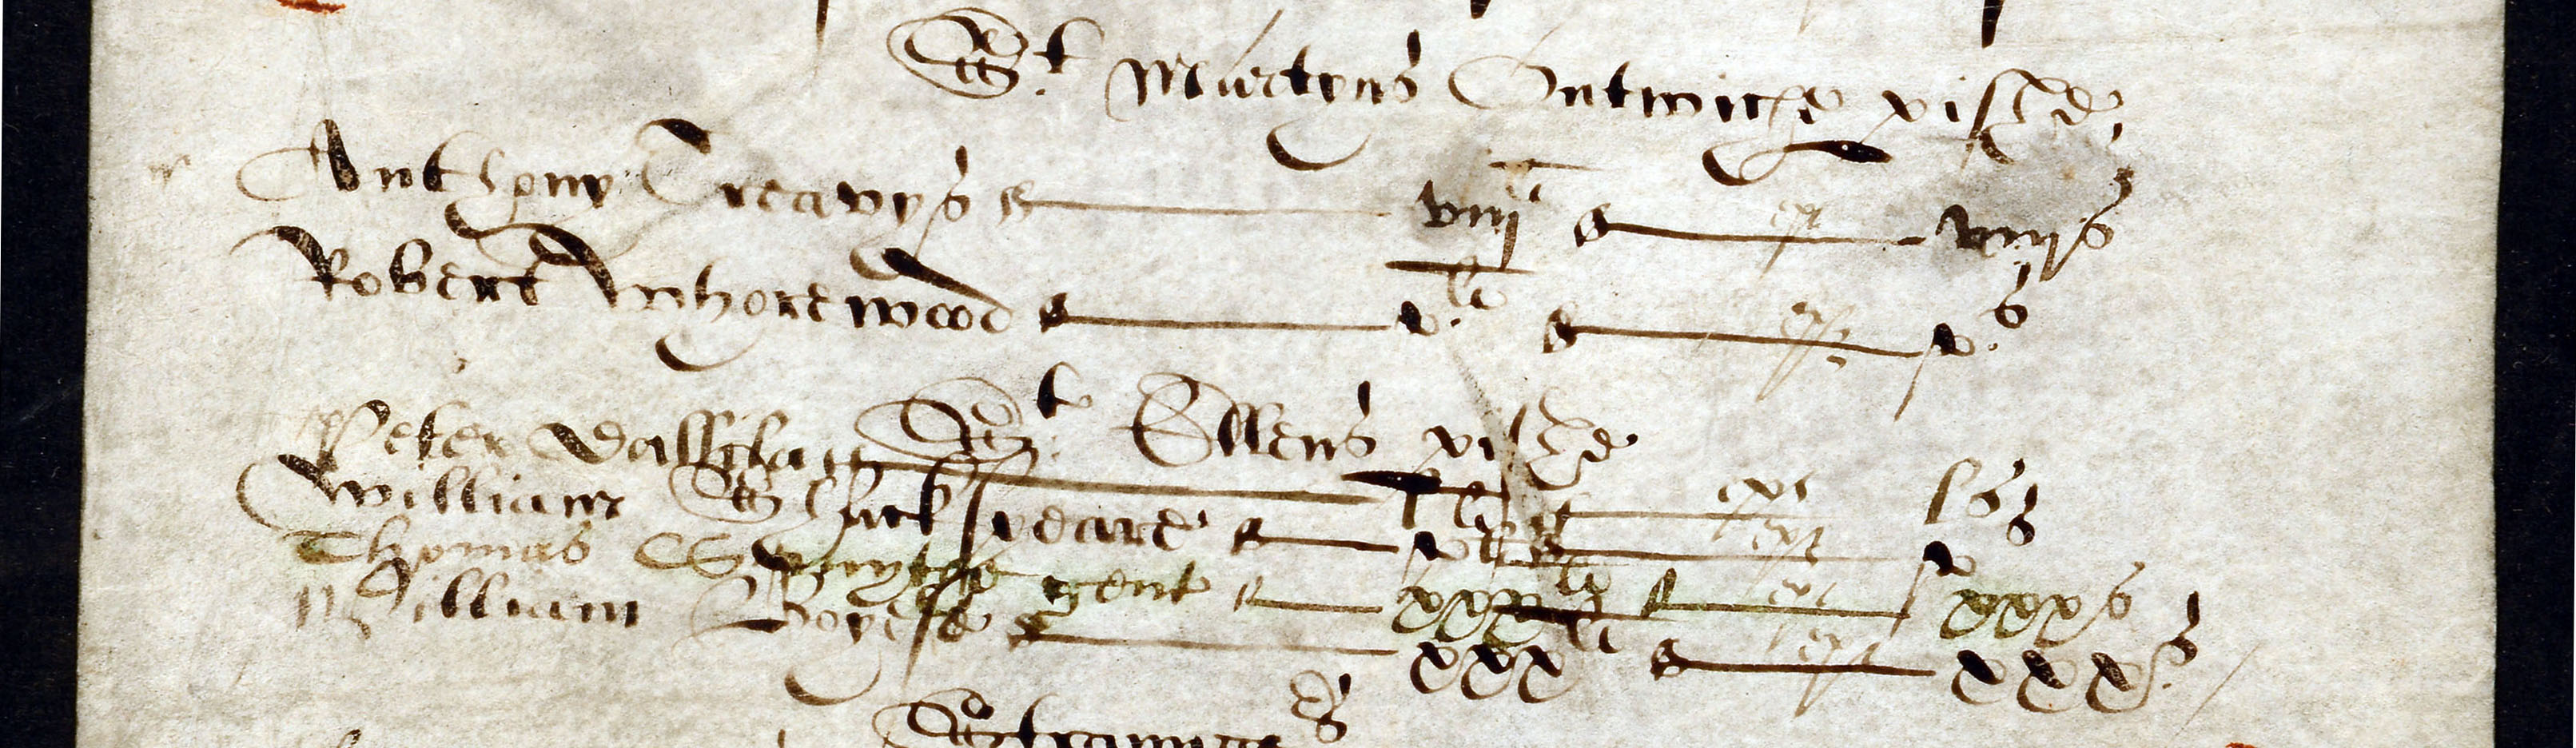 Shakespeare the tax evader: extract from a certificate by London tax commissioners, 1597 (E 179/146 f.354)